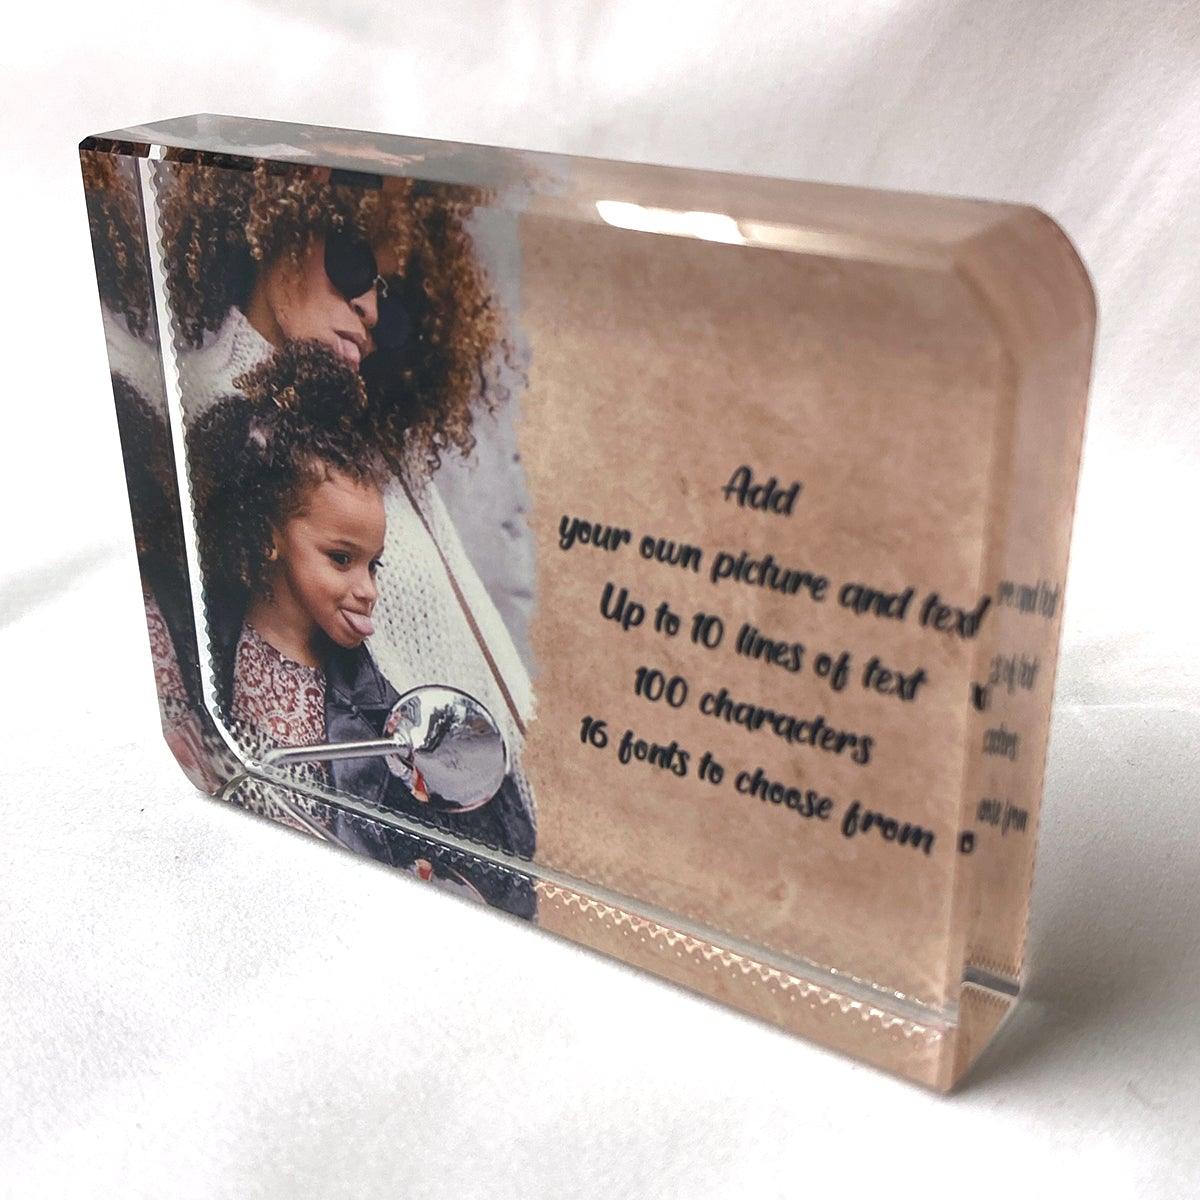 Full Personalised with Your Picture and Text Personalised Printed Crystal Block - shopquality4u